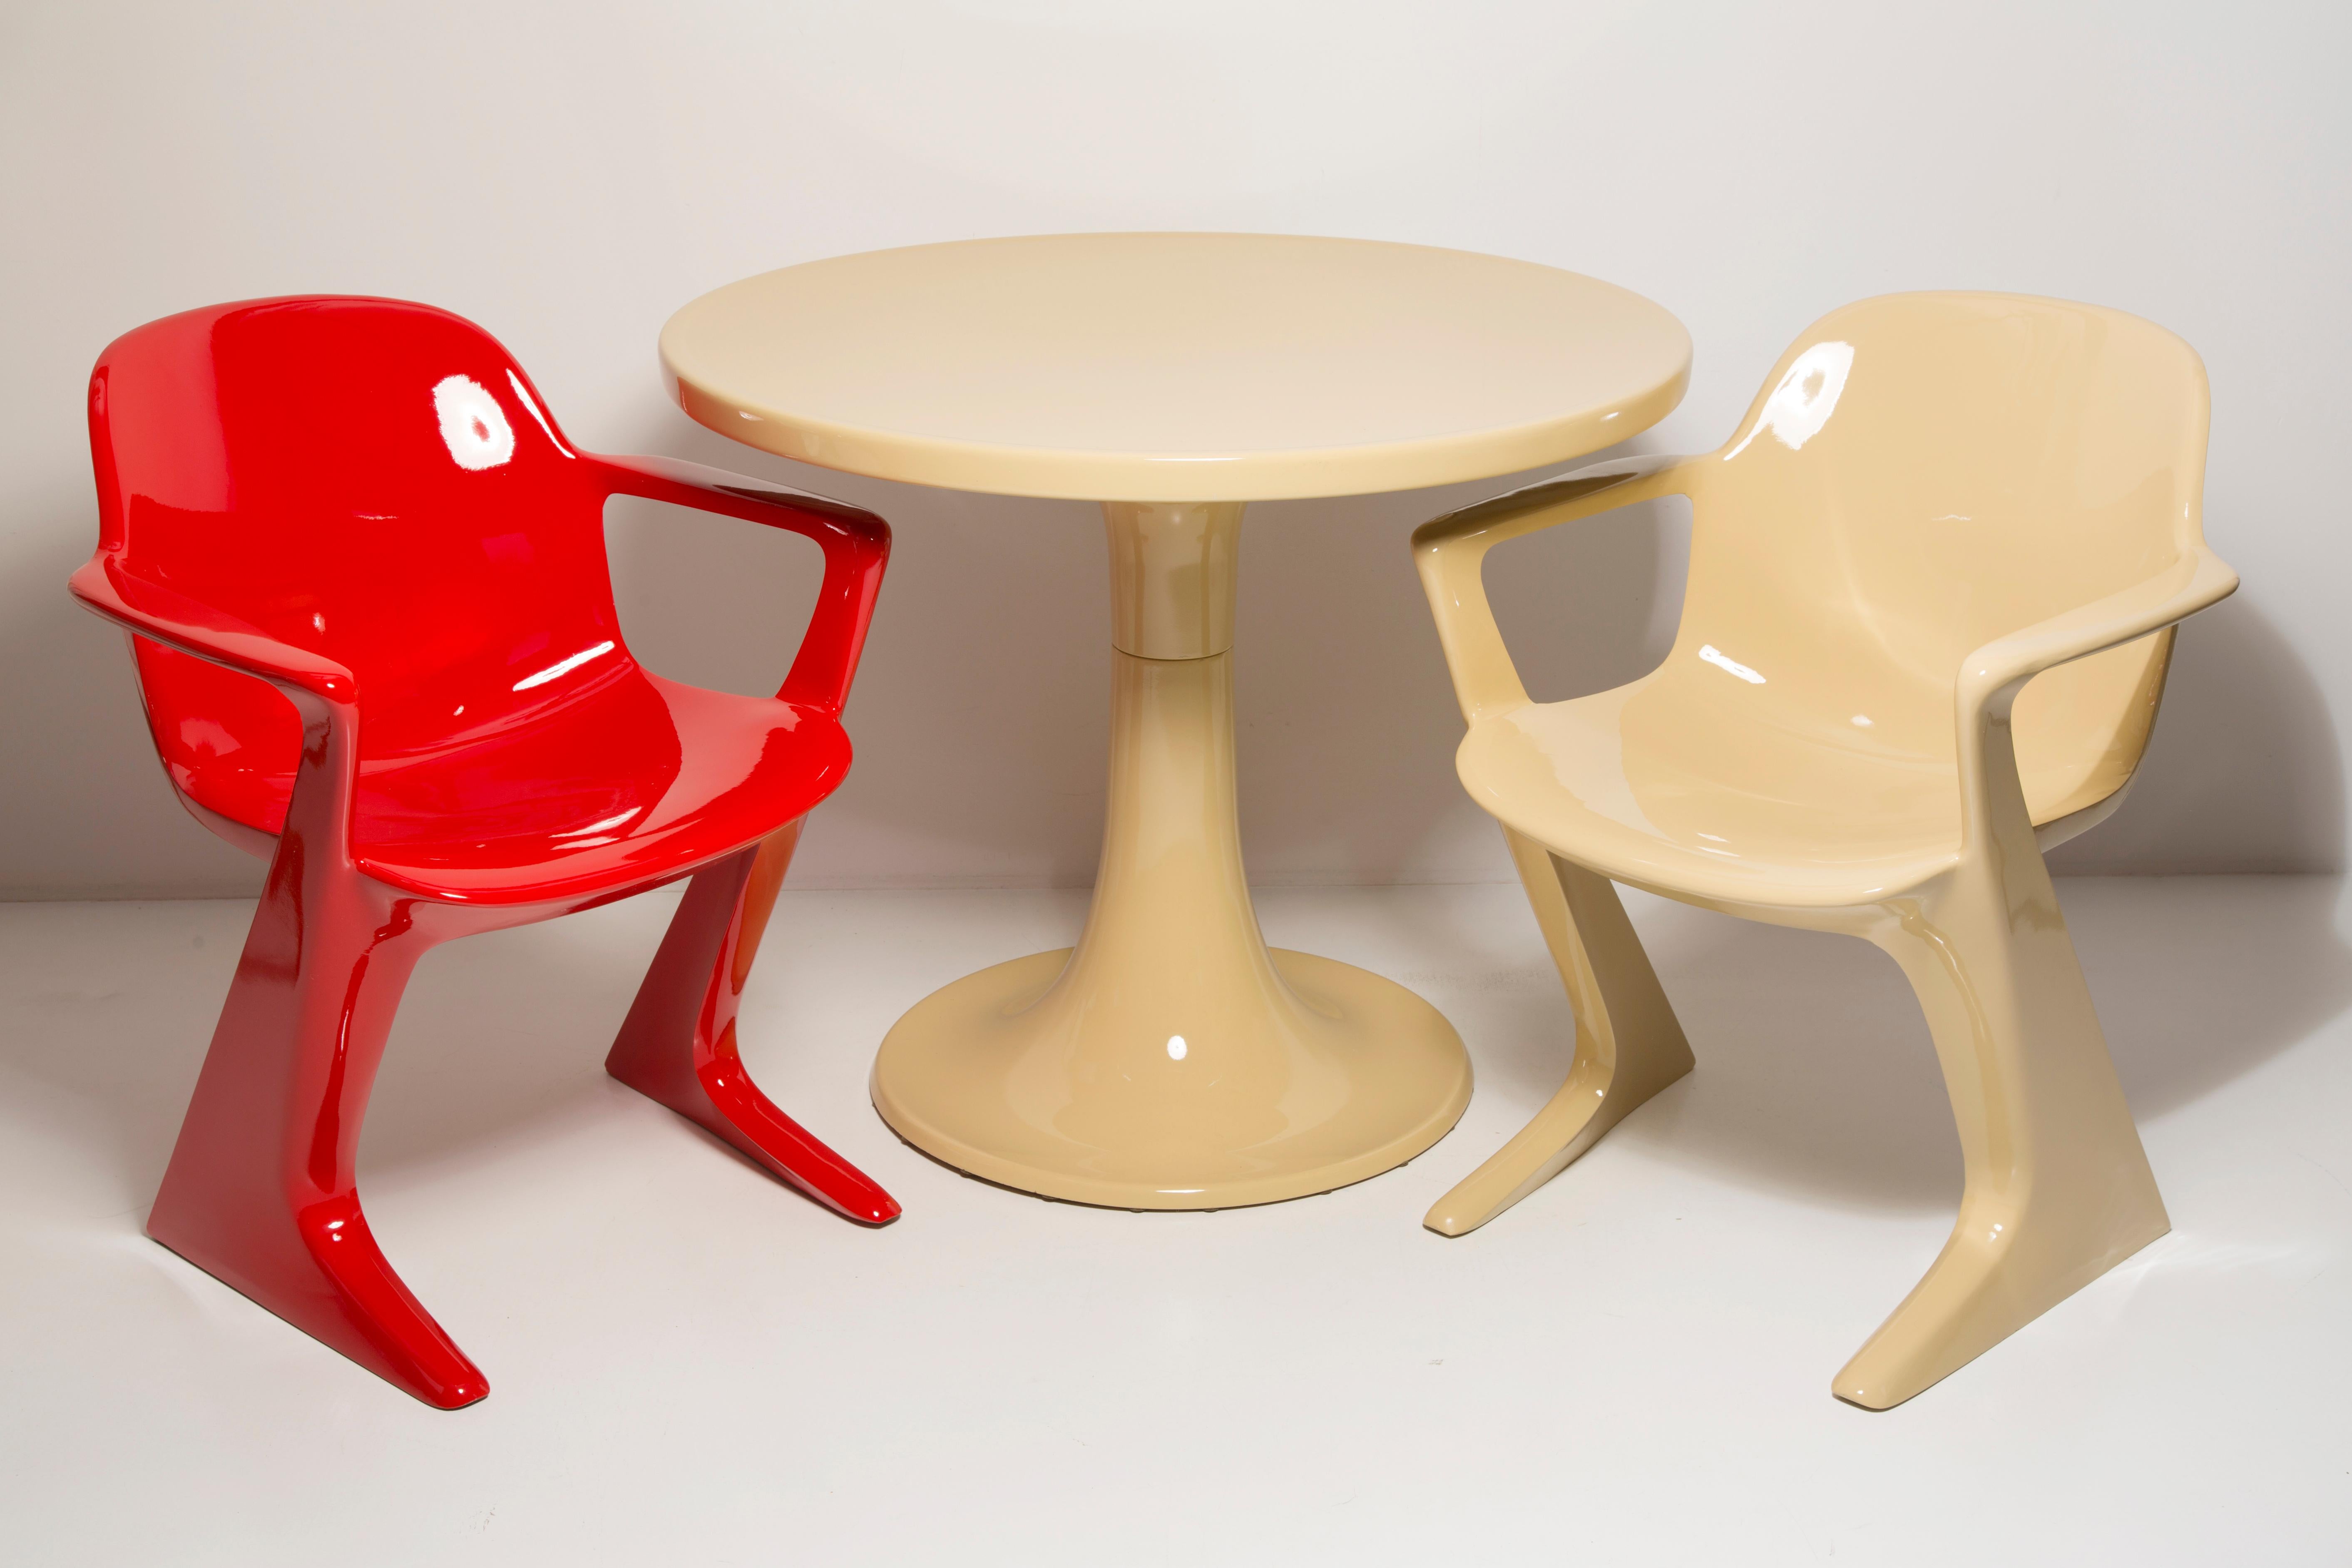 Fiberglass Midcentury Beige and Red Kangaroo Chairs and Table Ernst Moeckl, Germany, 1968 For Sale